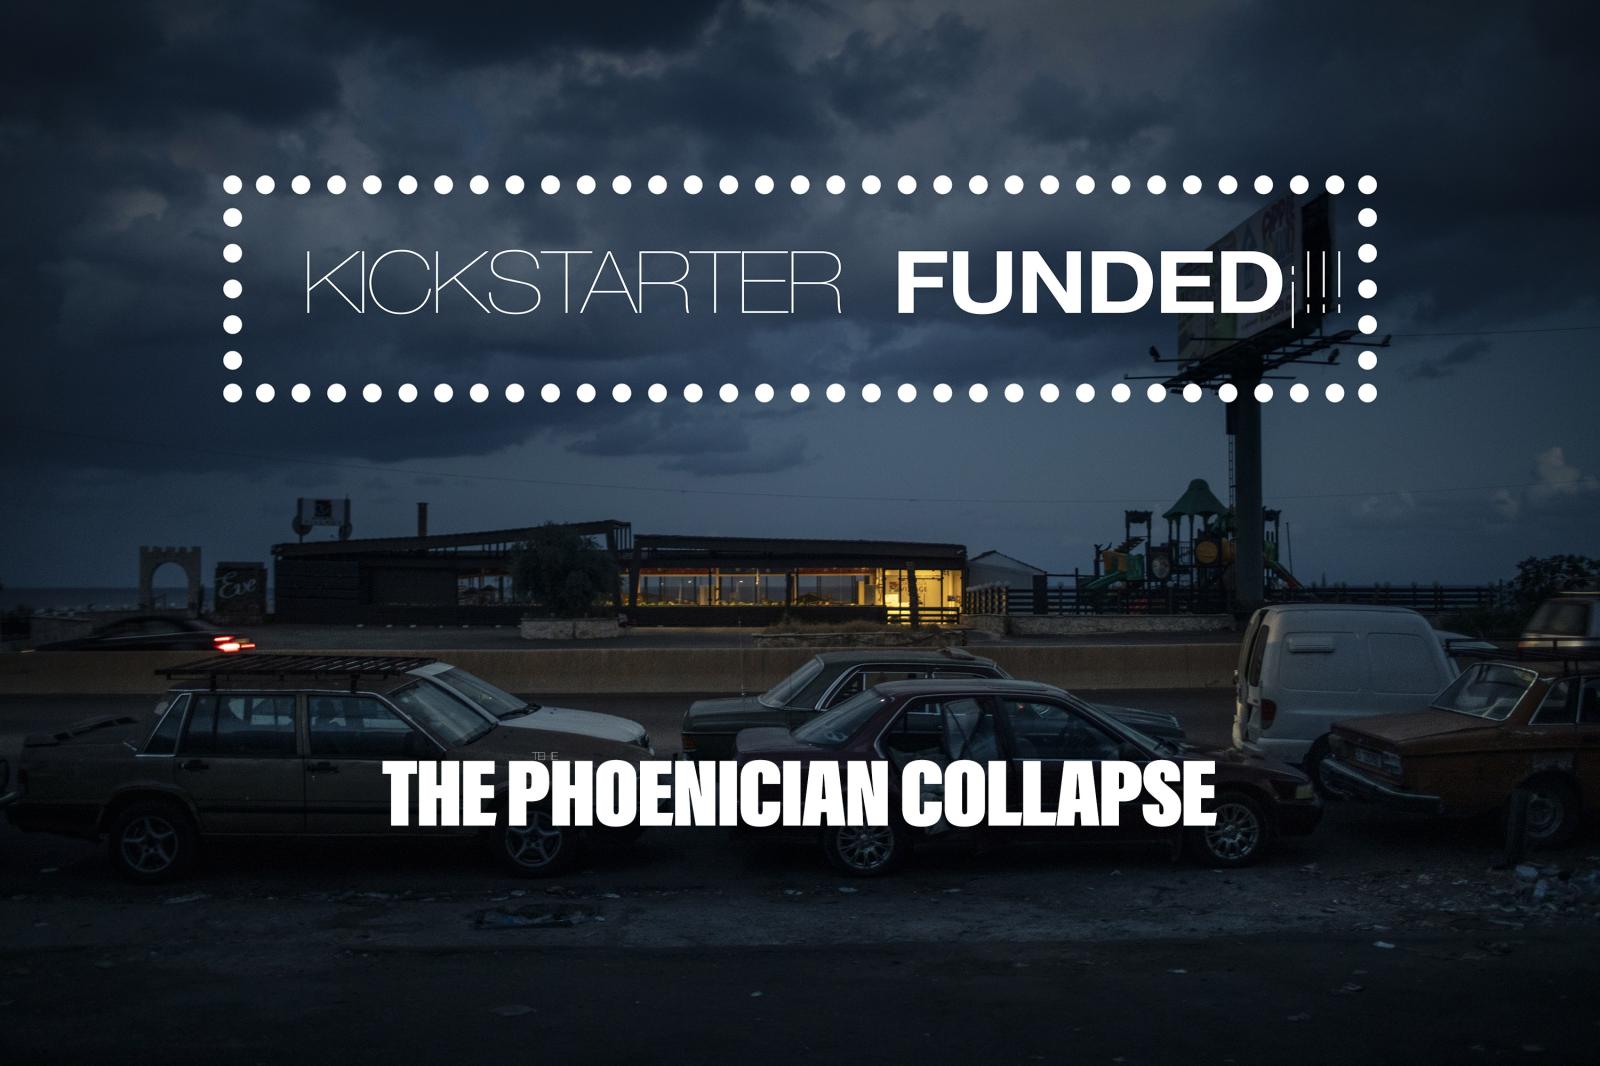 PhoenicianCollapse/makingoff -  The Kickstarter Campaign with FOTOEVIDENCE...